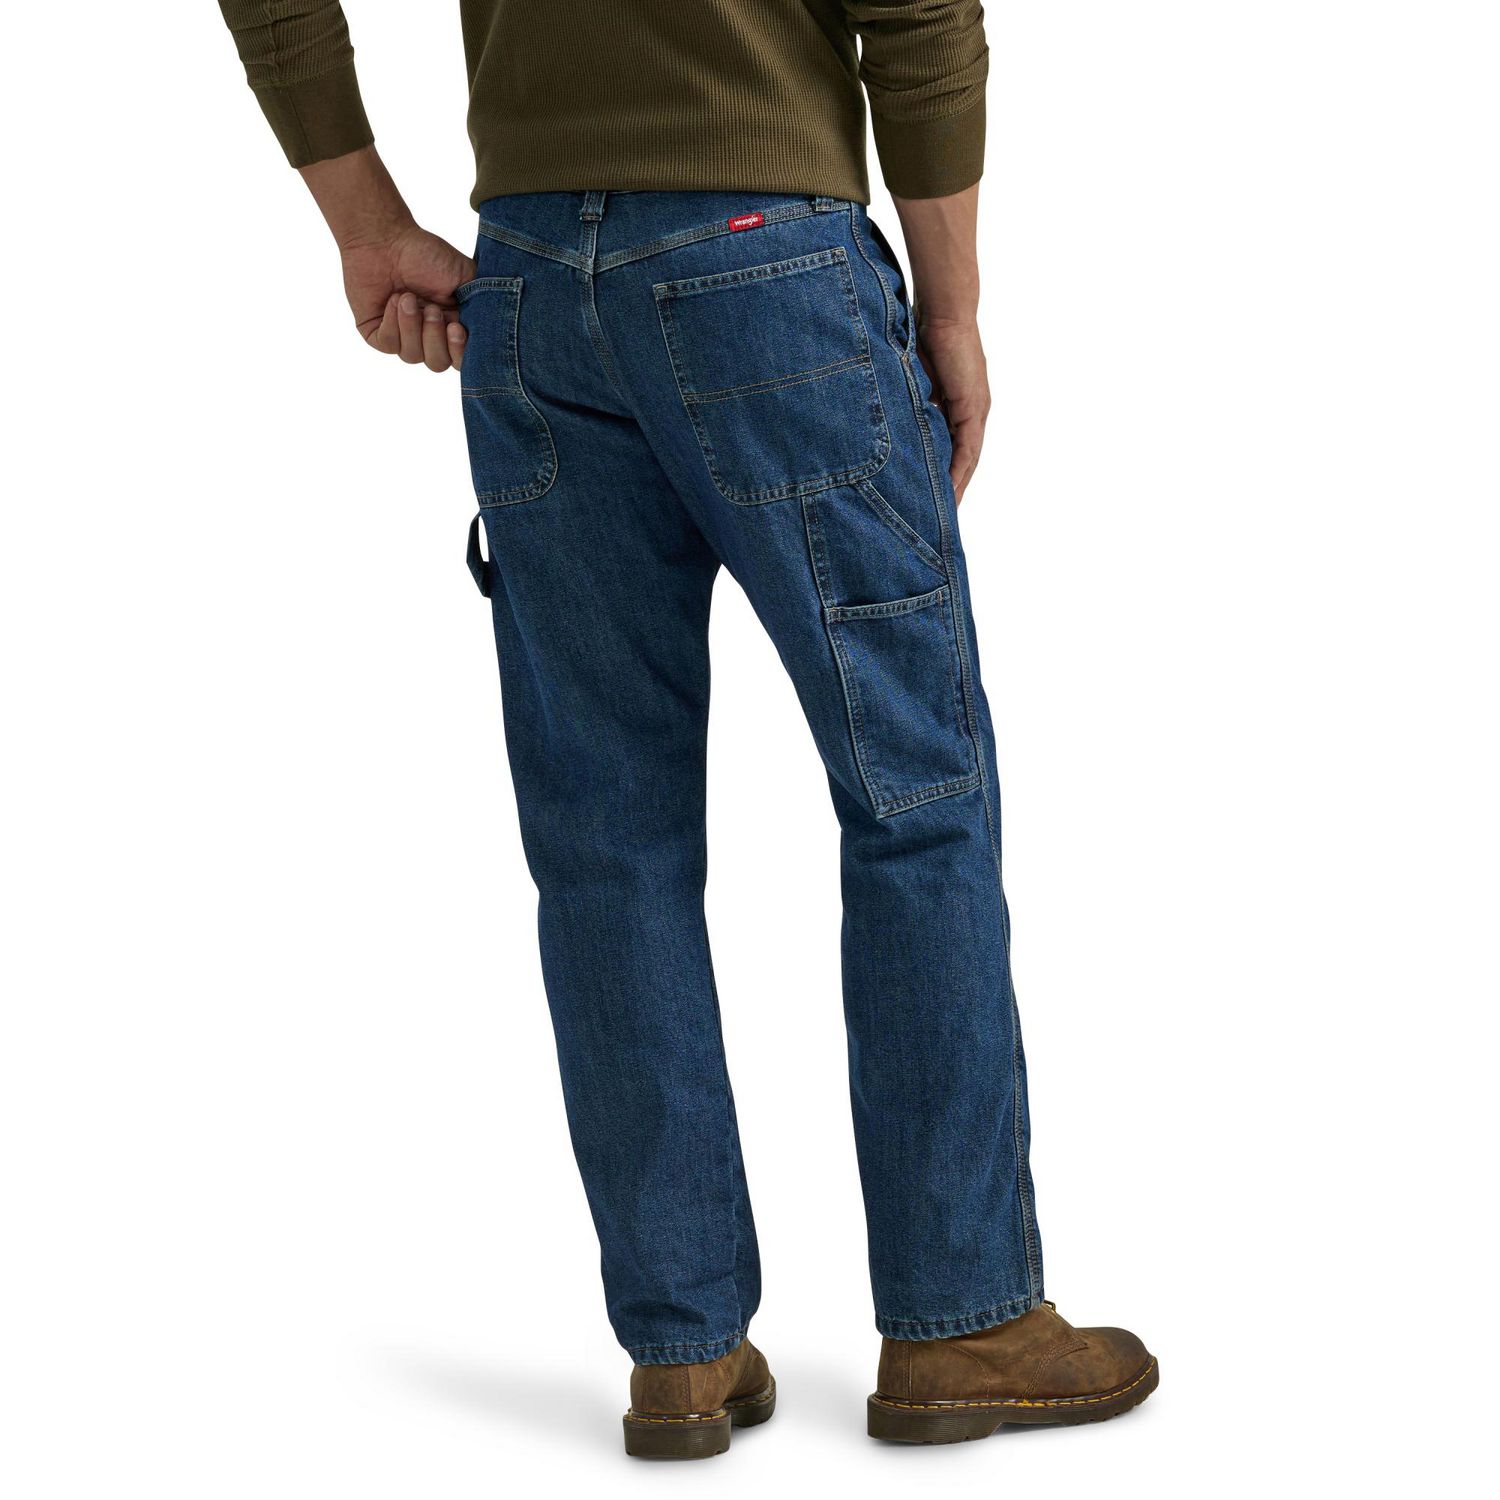 Hammer's - Sevierville - Men's fleece lined pants and jeans! Only